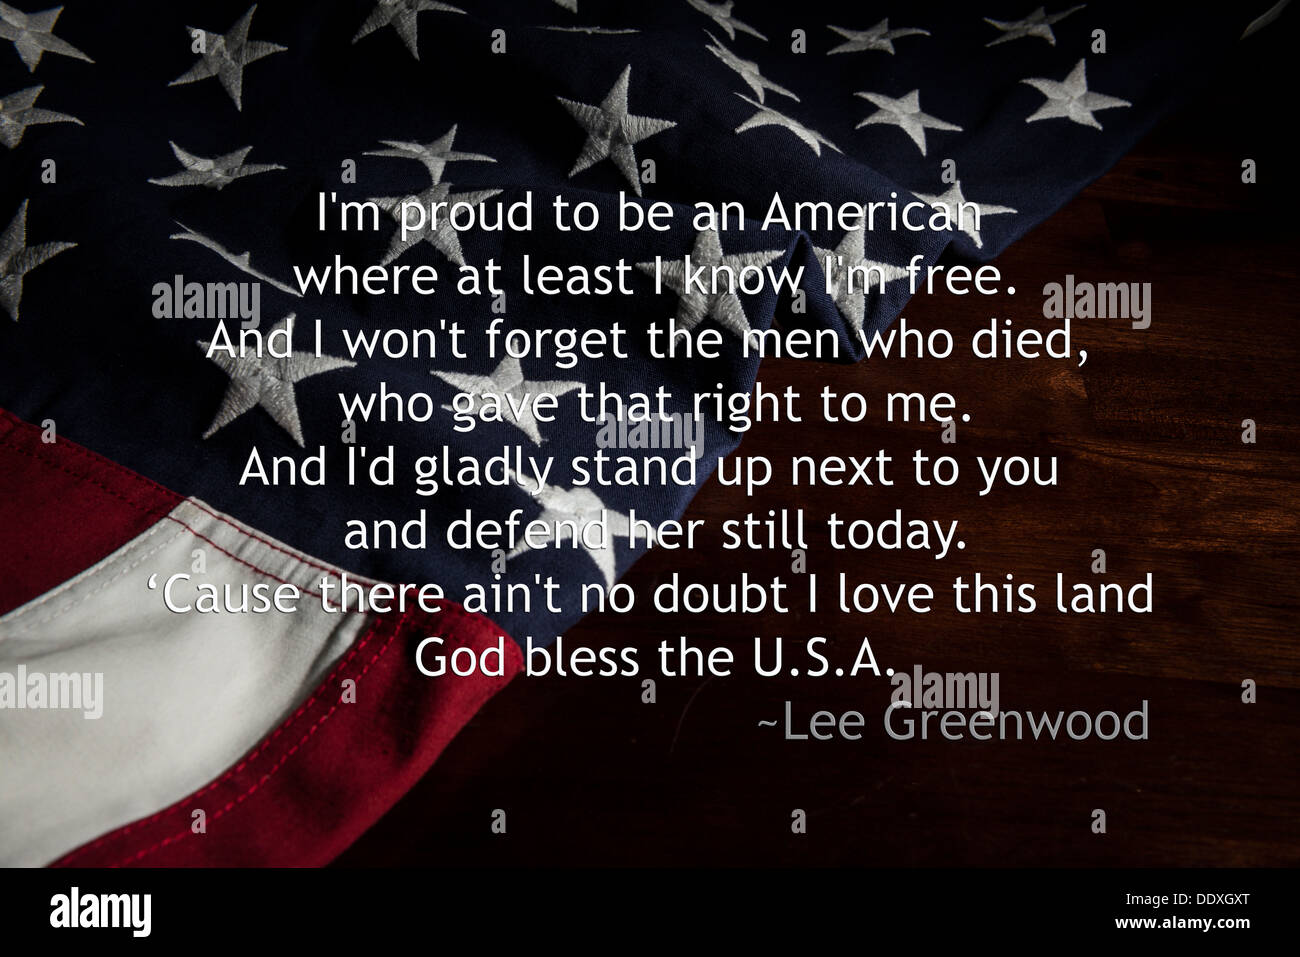 Proud To Be An American Lyrics From Lee Greenwood Song